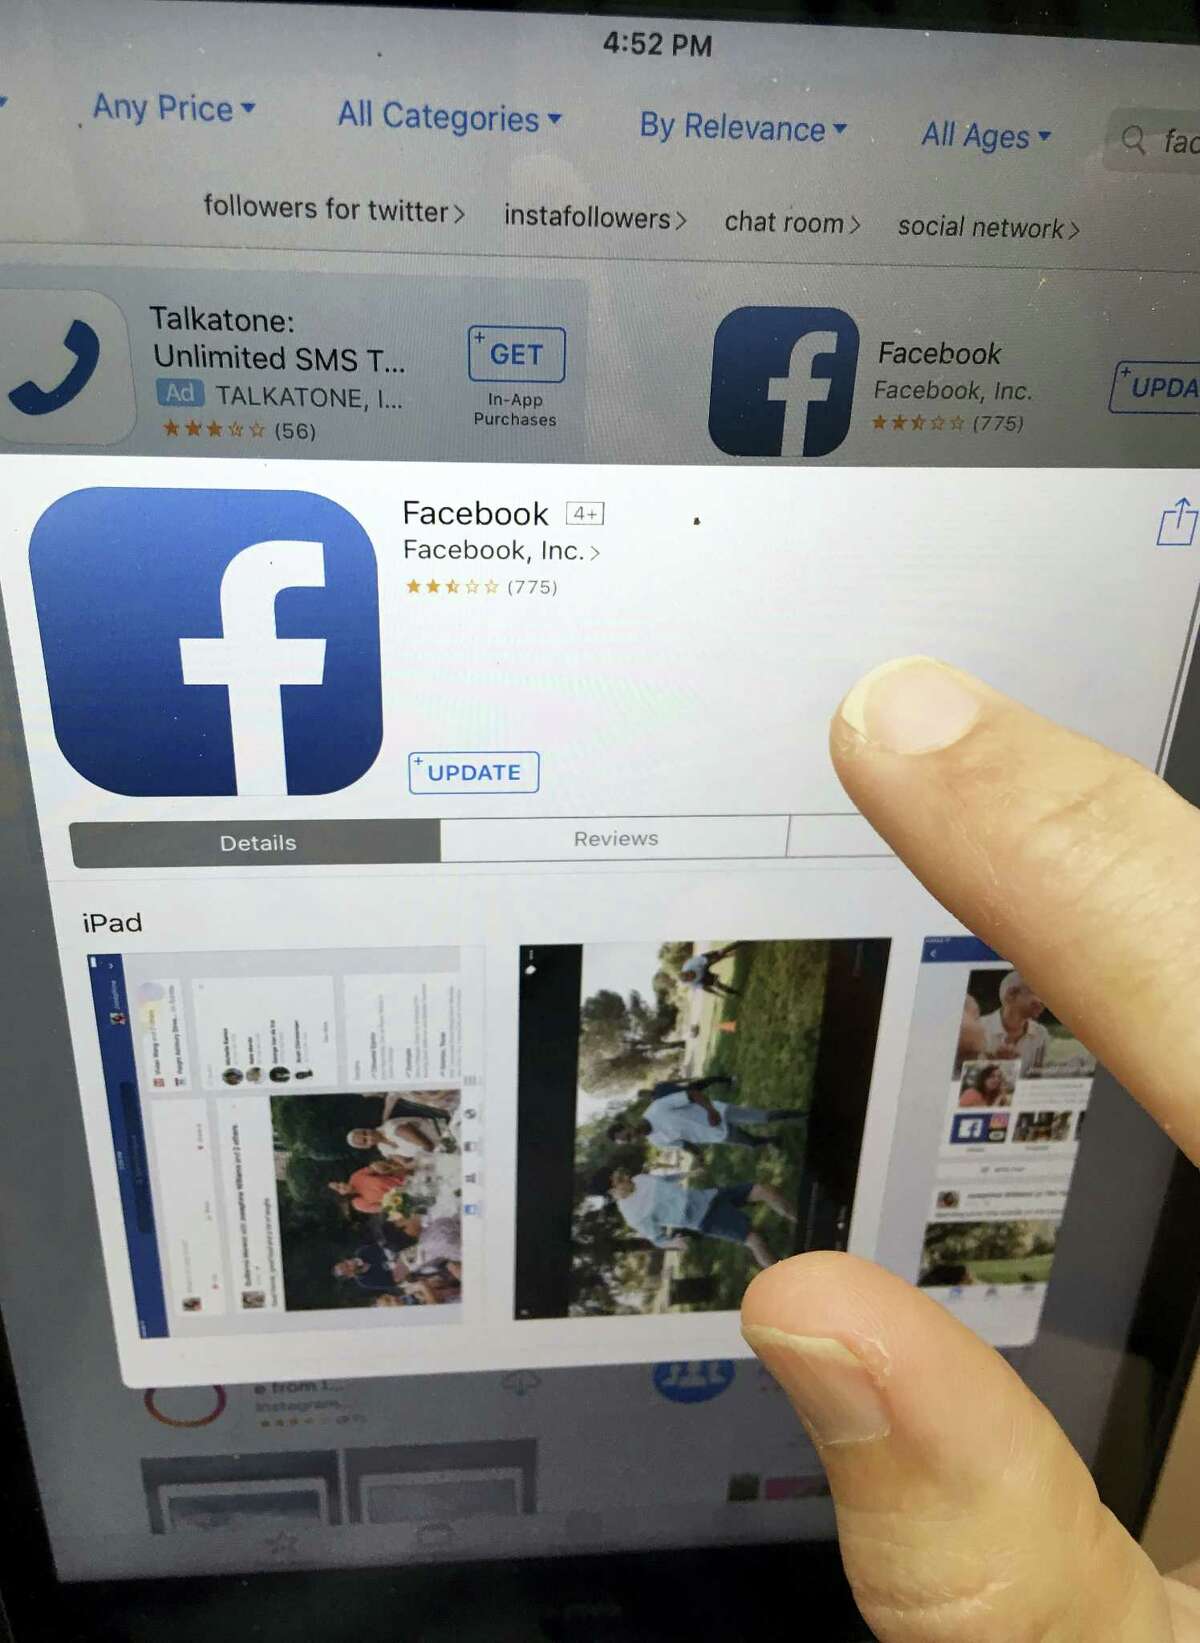 This Monday, June 19, 2017, photo shows Facebook launched on an iPhone, in North Andover, Mass. Facebook is working on a way for news organizations to charge readers for articles they share and read on the social network. Facebook‚Äôs head of news partnerships, Campbell Brown, says the current plan is to require payments after reading 10 articles from a publisher through Facebook. Brown said at a conference in New York on Tuesday, July 18, 2017, that news organizations have been calling for subscription capabilities.